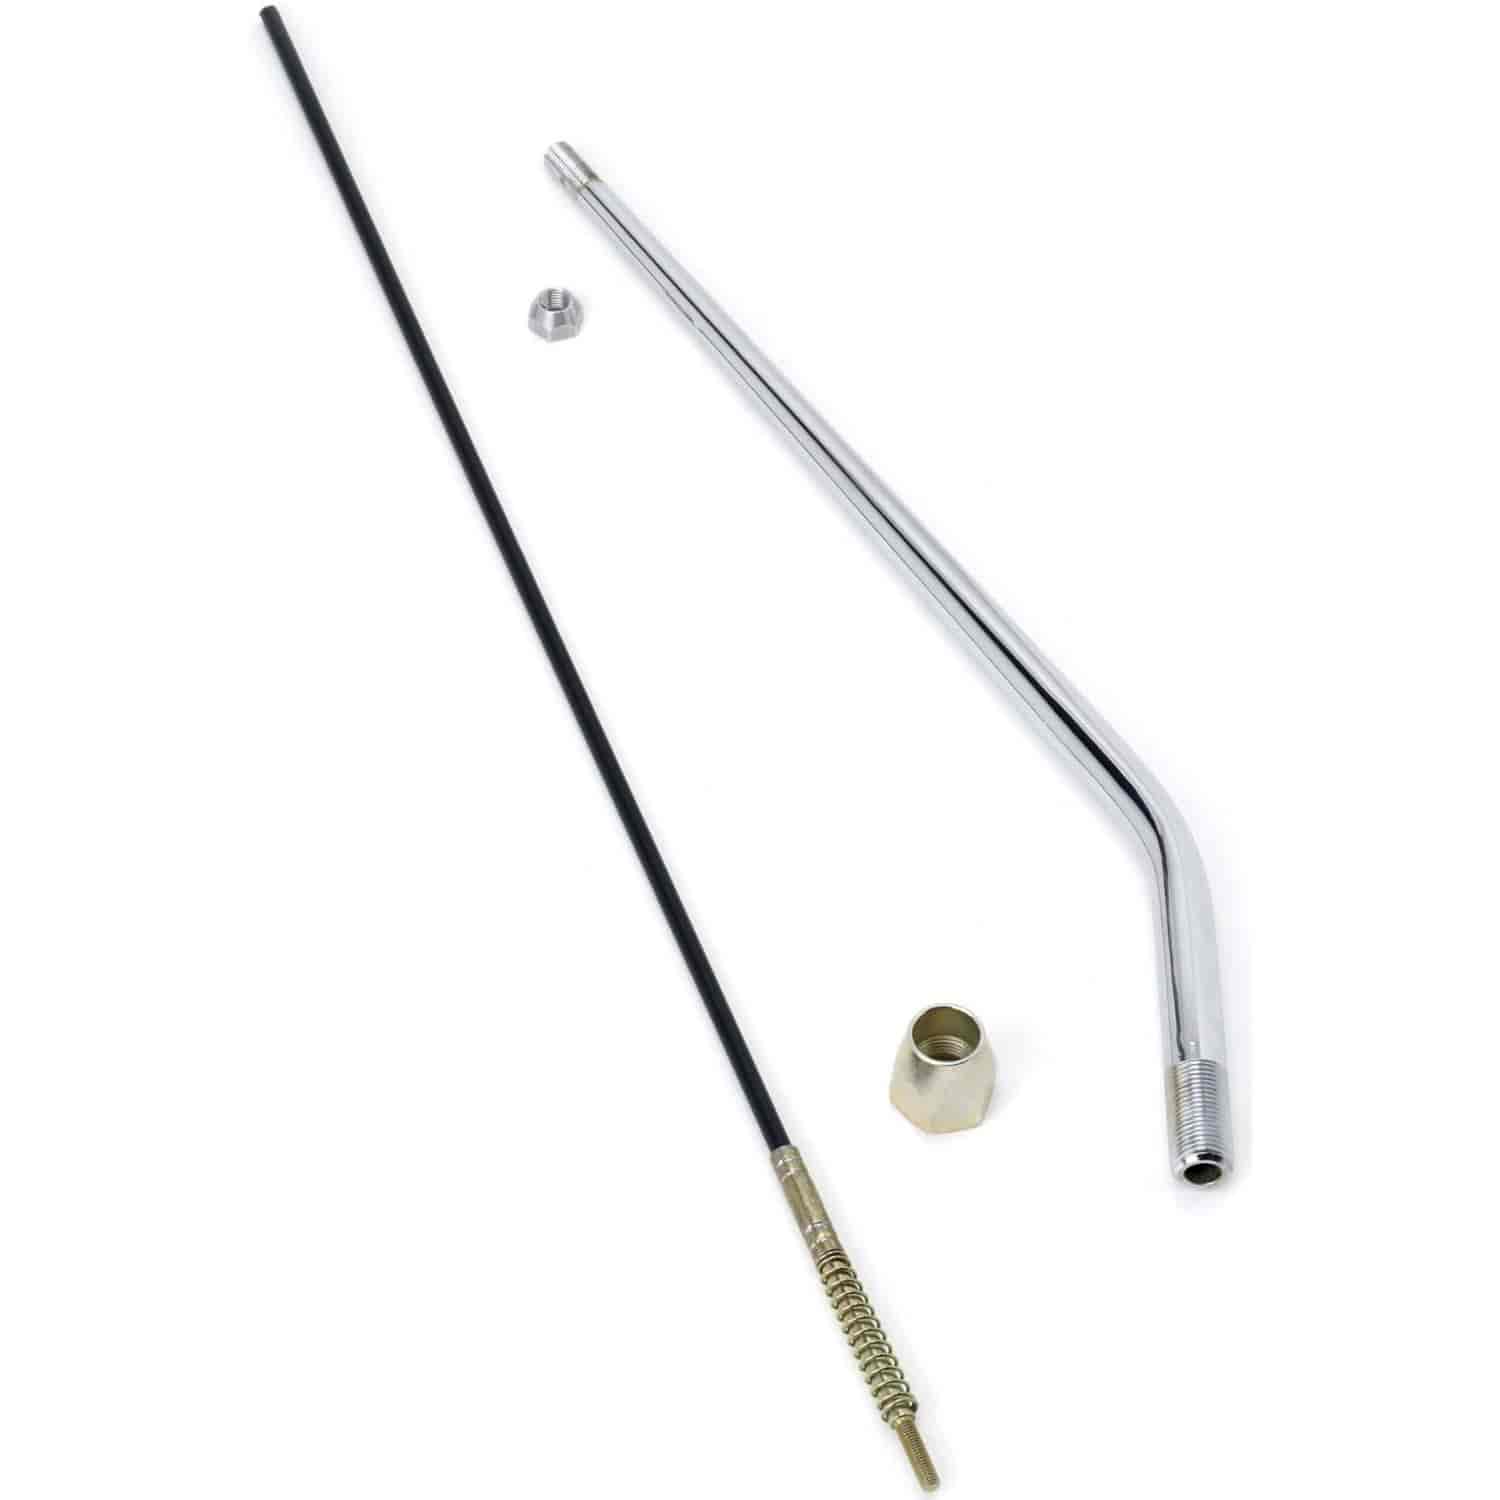 Nostalgia Shifter Lever Replacement Kit 32" Double Bend